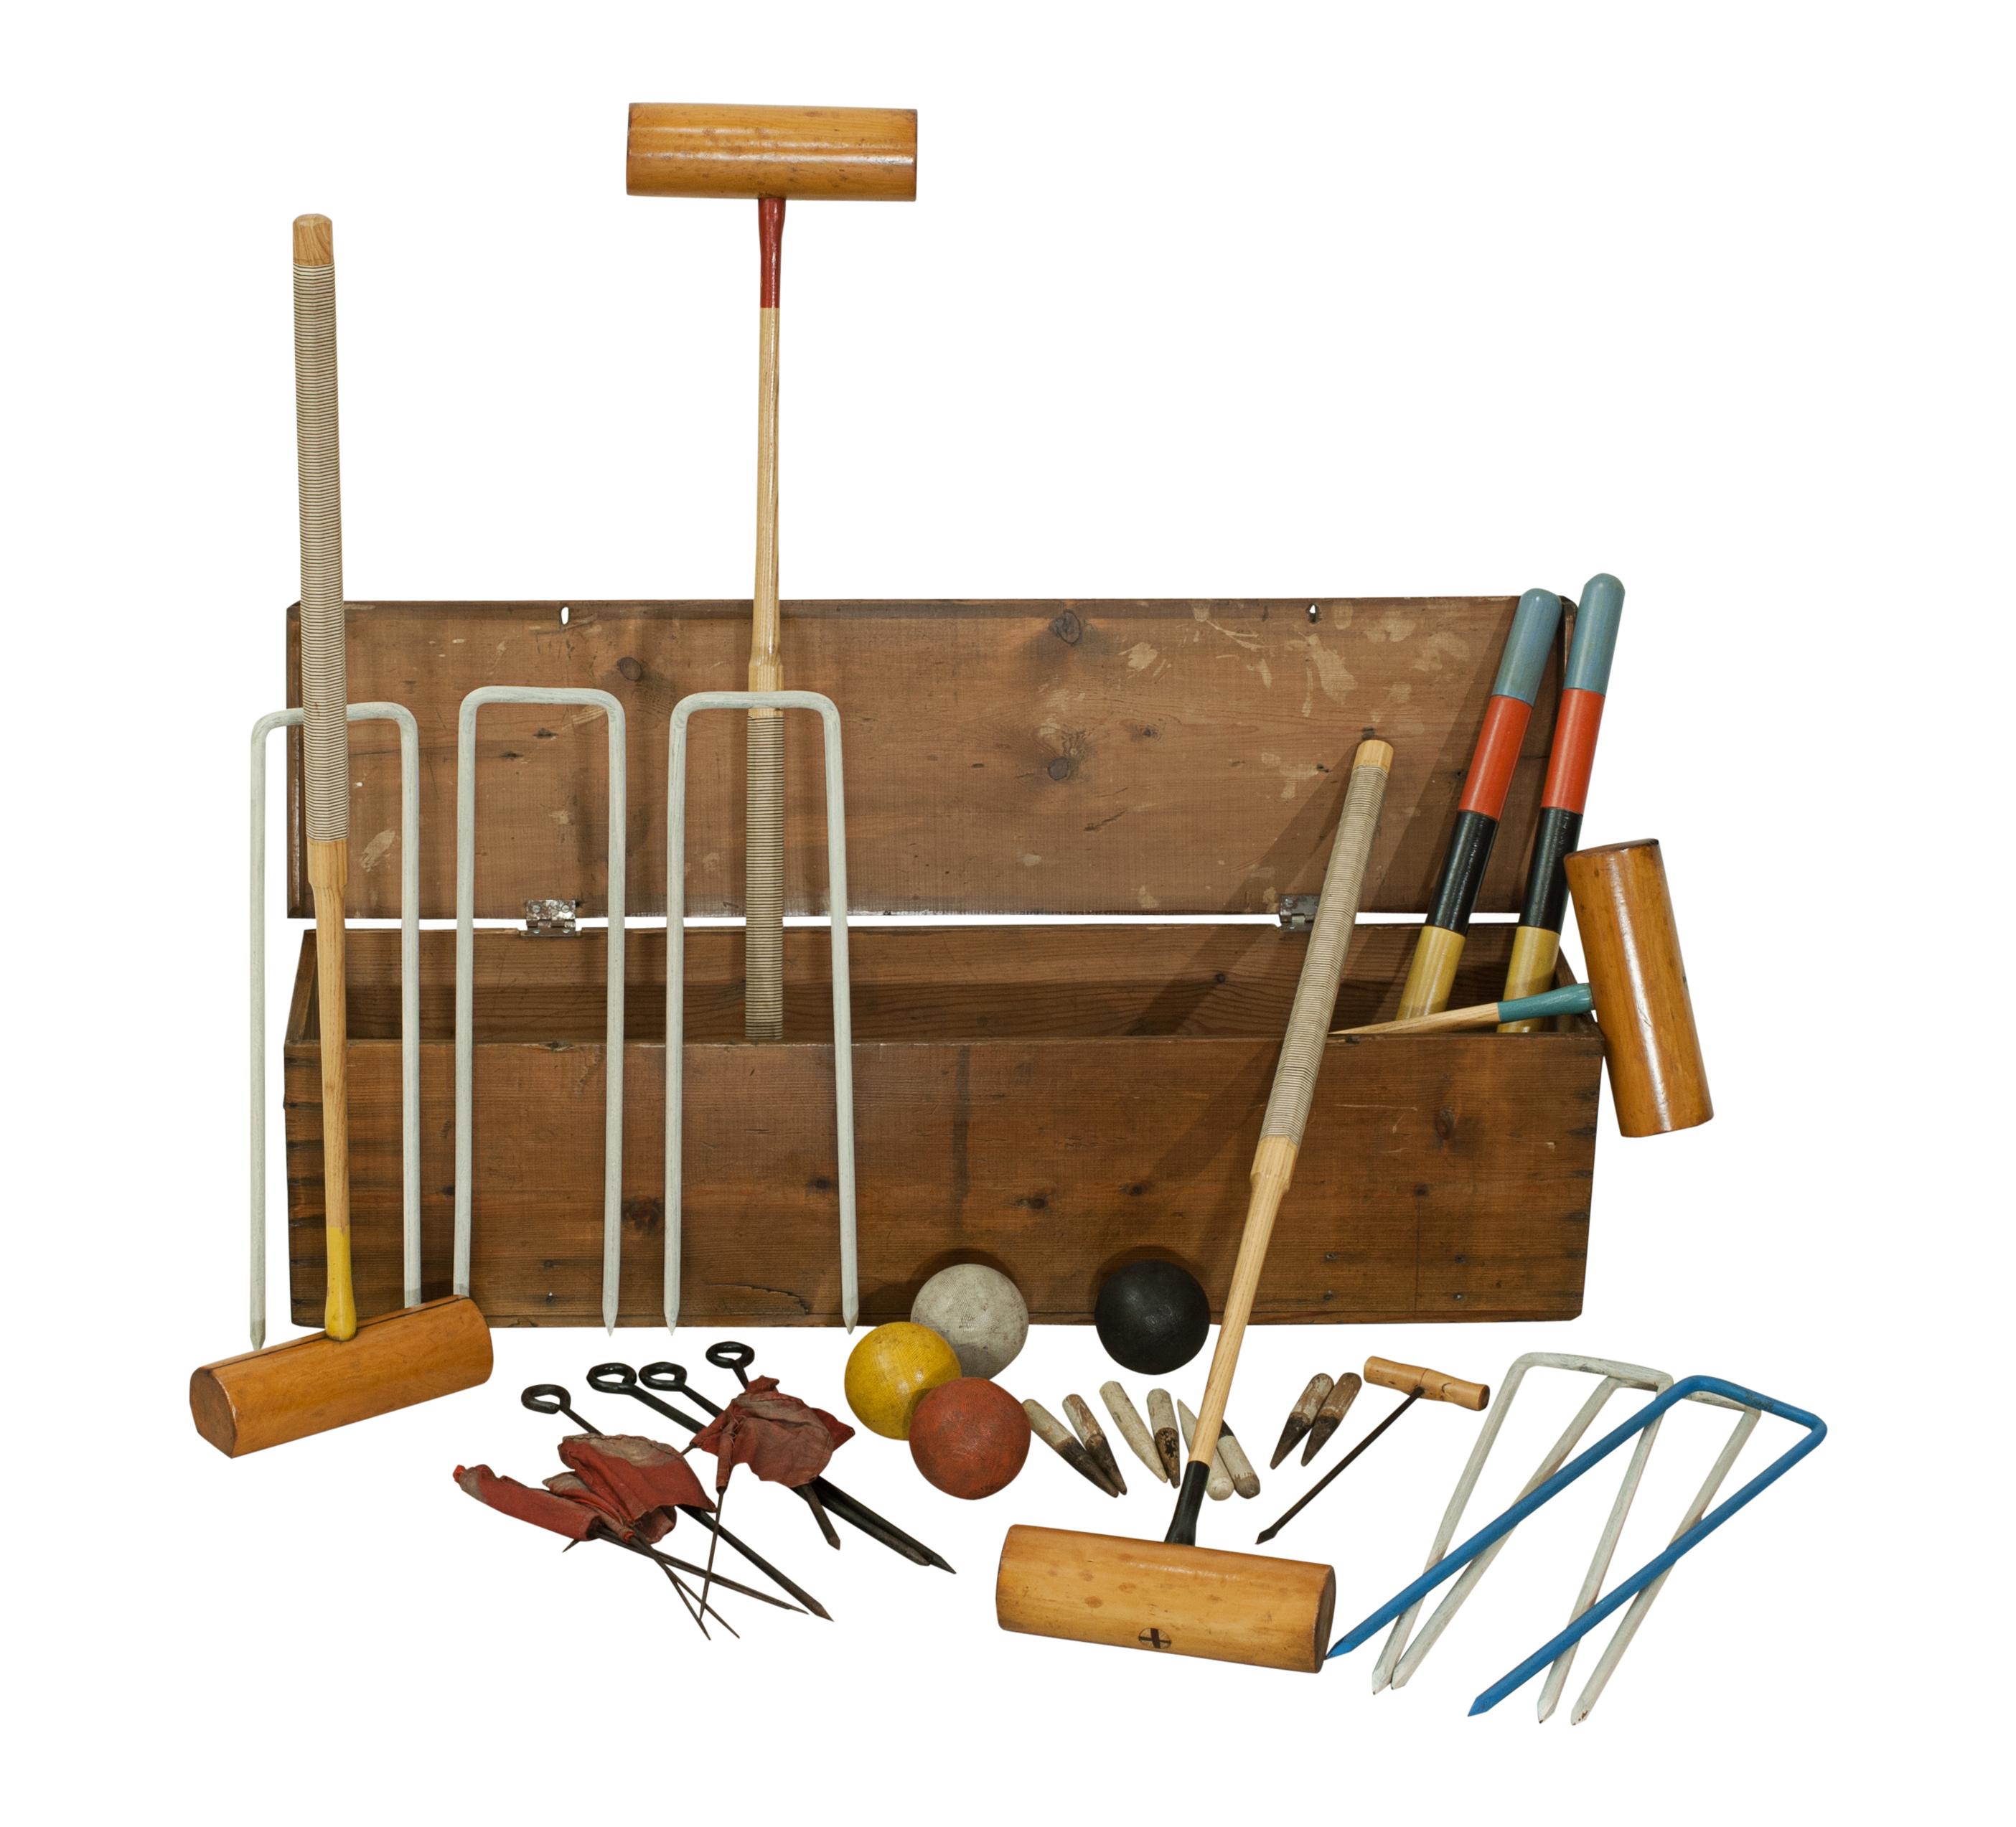 A good croquet set in polished pine box with two carry handles. The set comes with four box wood croquet mallets with octagonal ash handles with cord grip (which helps a player 'feel' the alignment of the mallet in play). To complete the set there